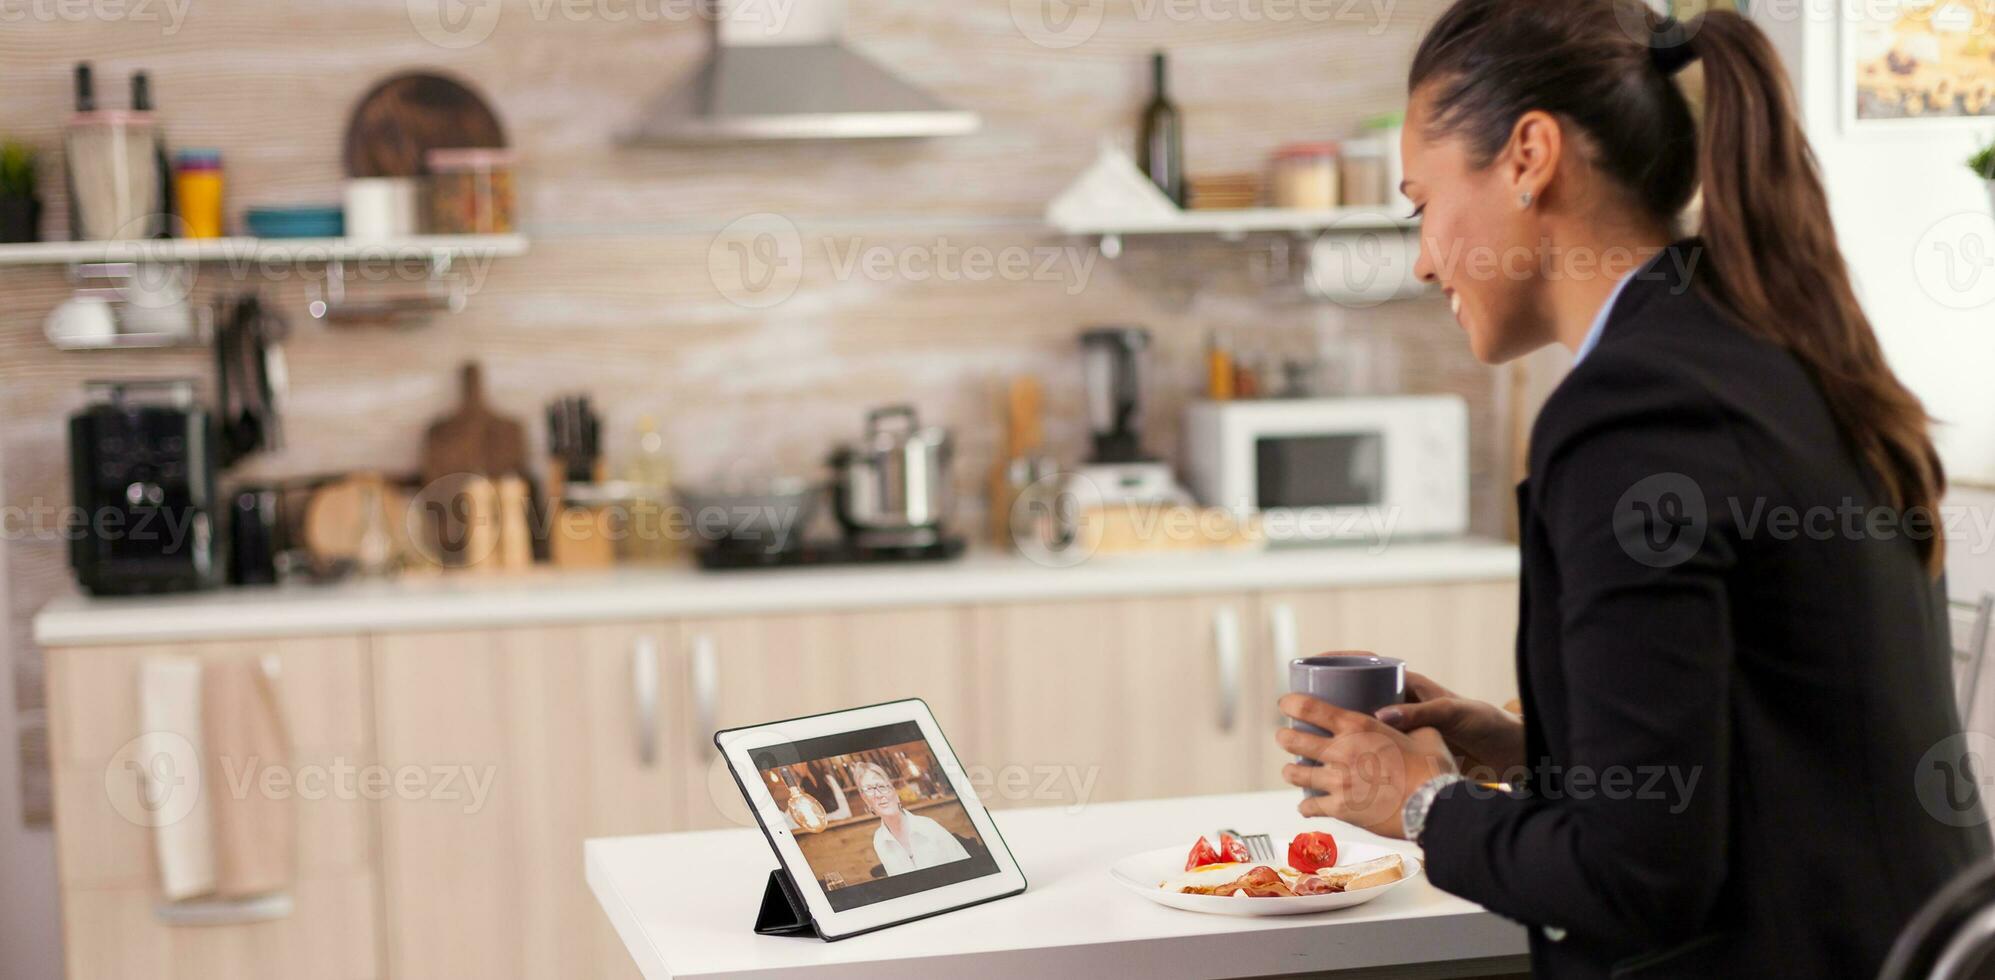 Business woman on a video call with her mother during breakfast. Using modern online internet web technology to chat via webcam videoconference app with relatives, family, friends and coworkers photo